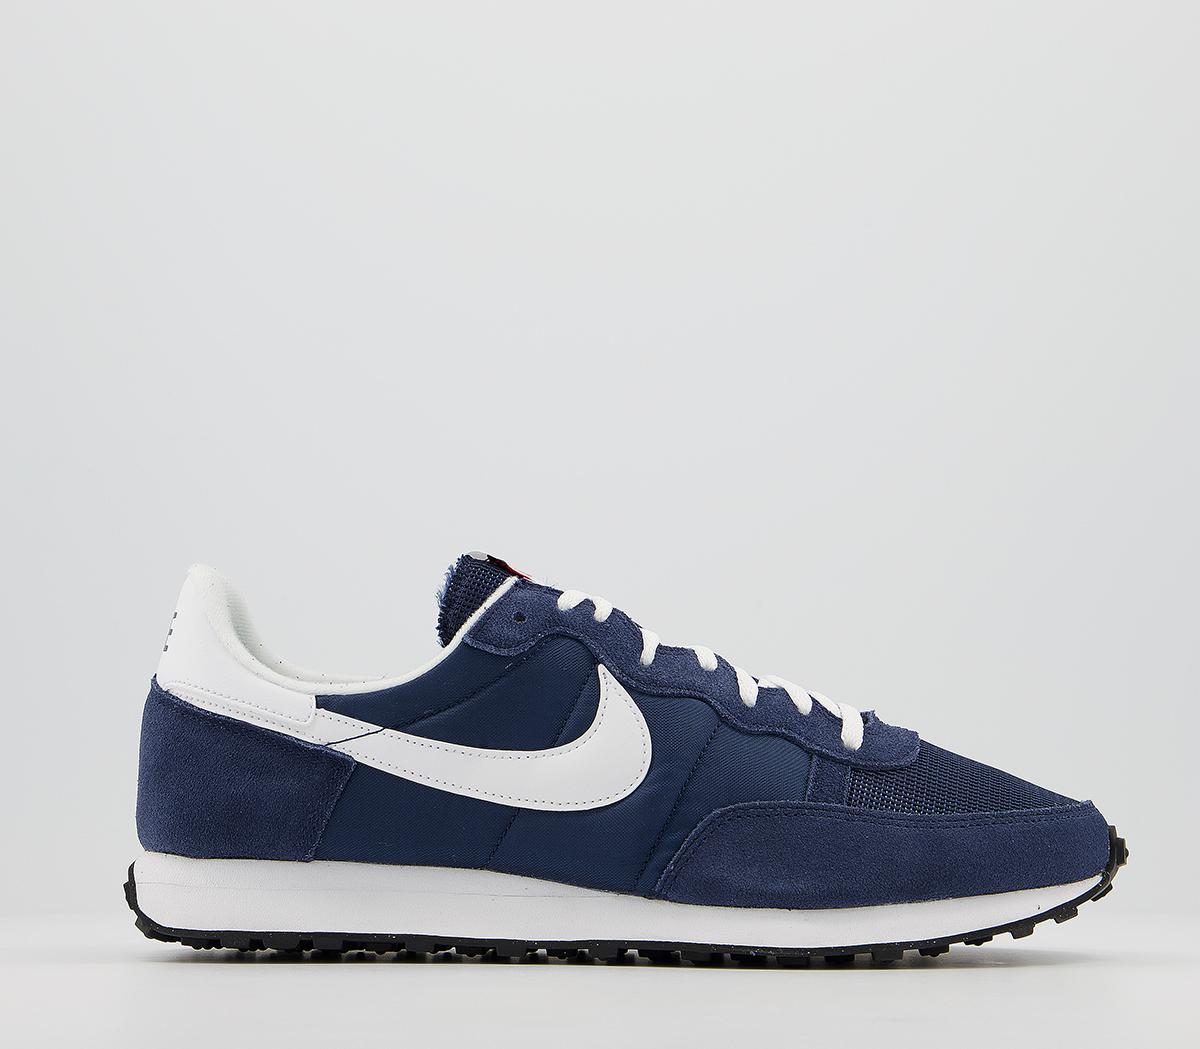 nike navy suede trainers